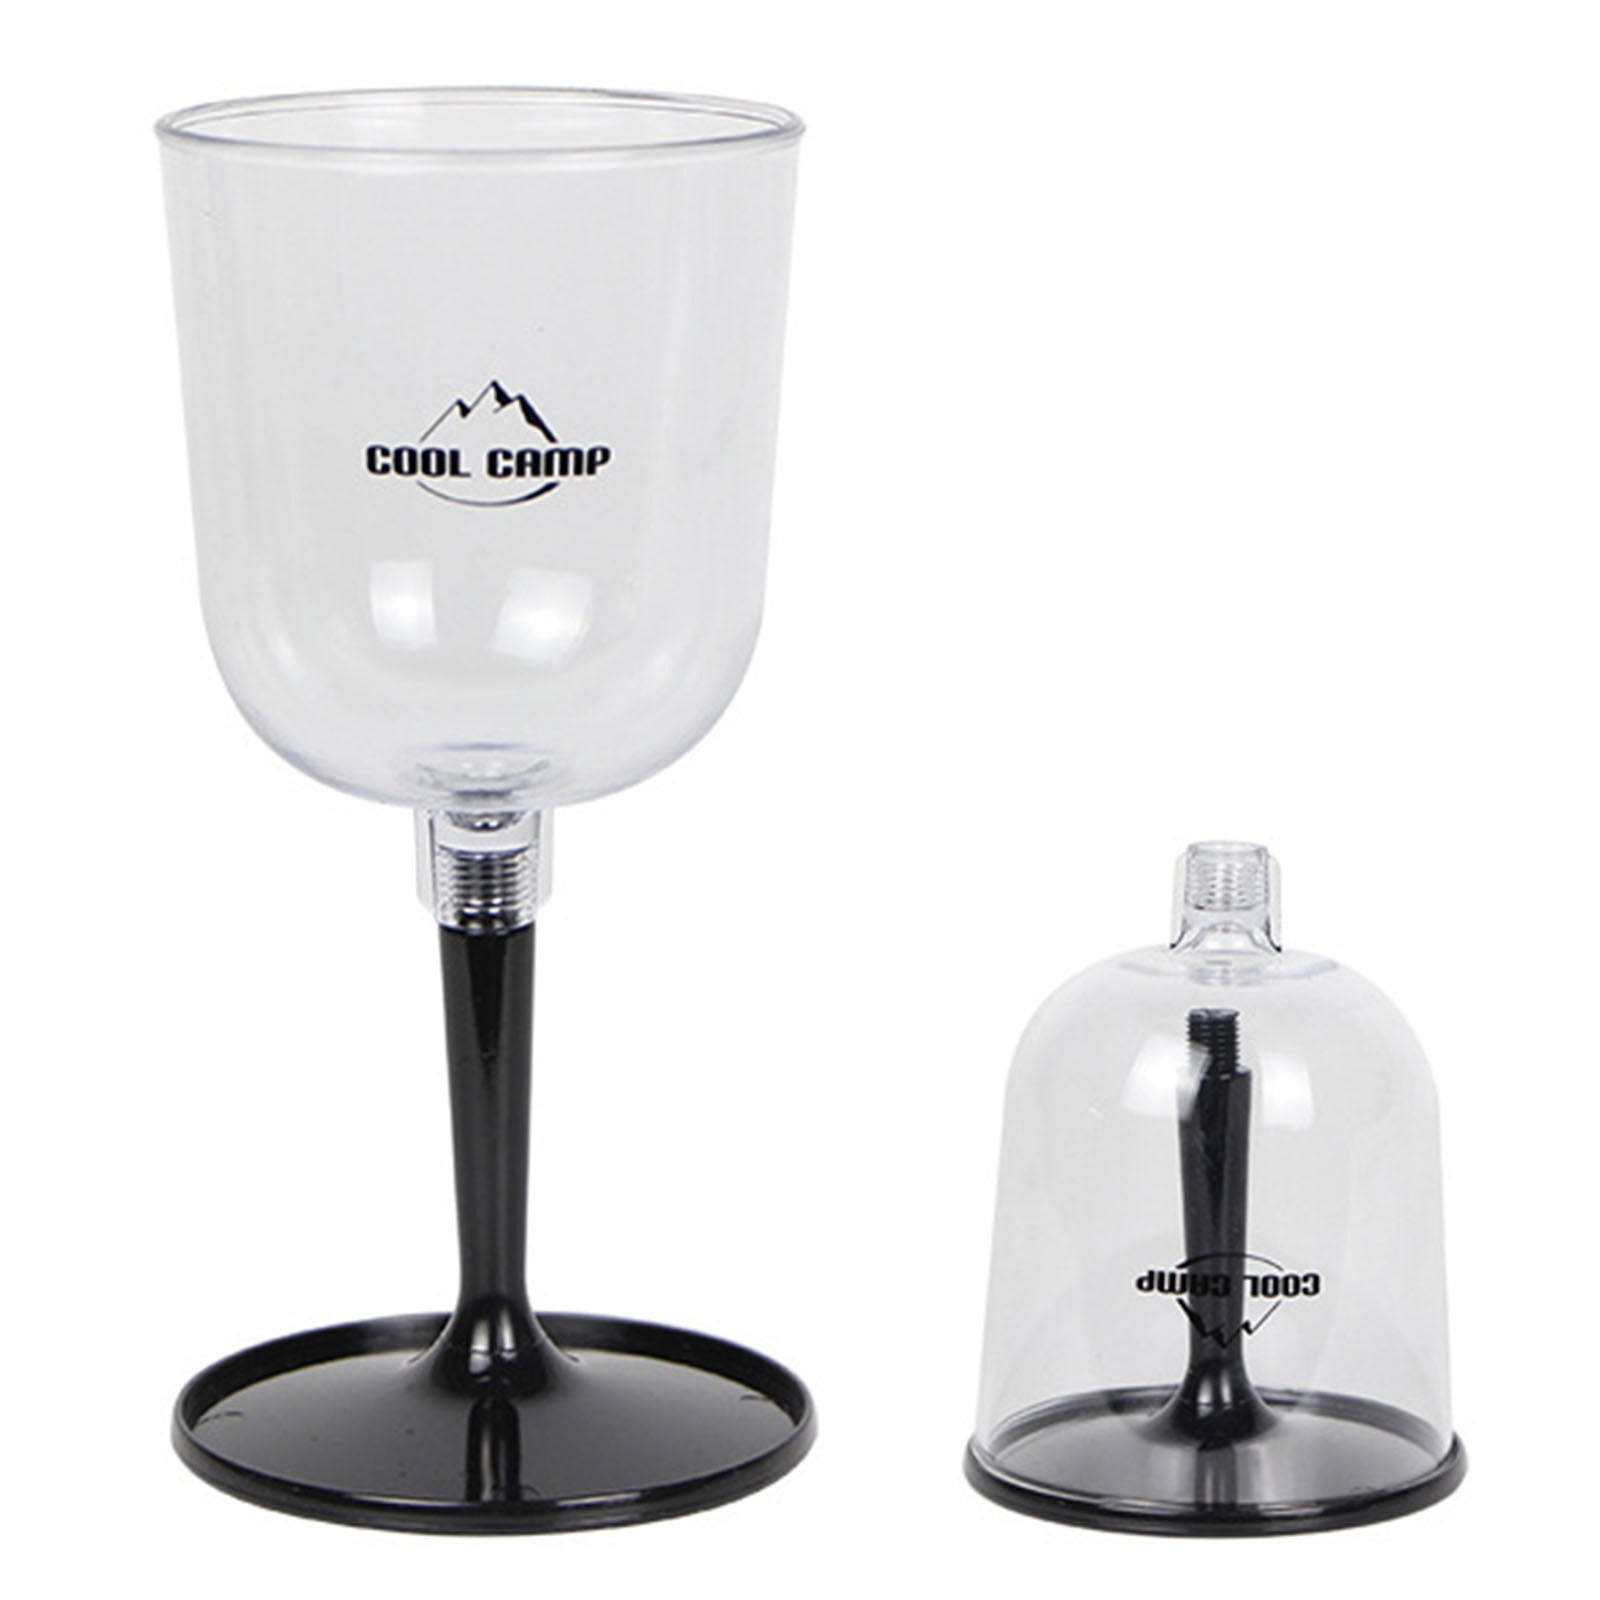 Outdoor Camping Anti-Fall Plastic Goblet Detachable Portable Wine Glass